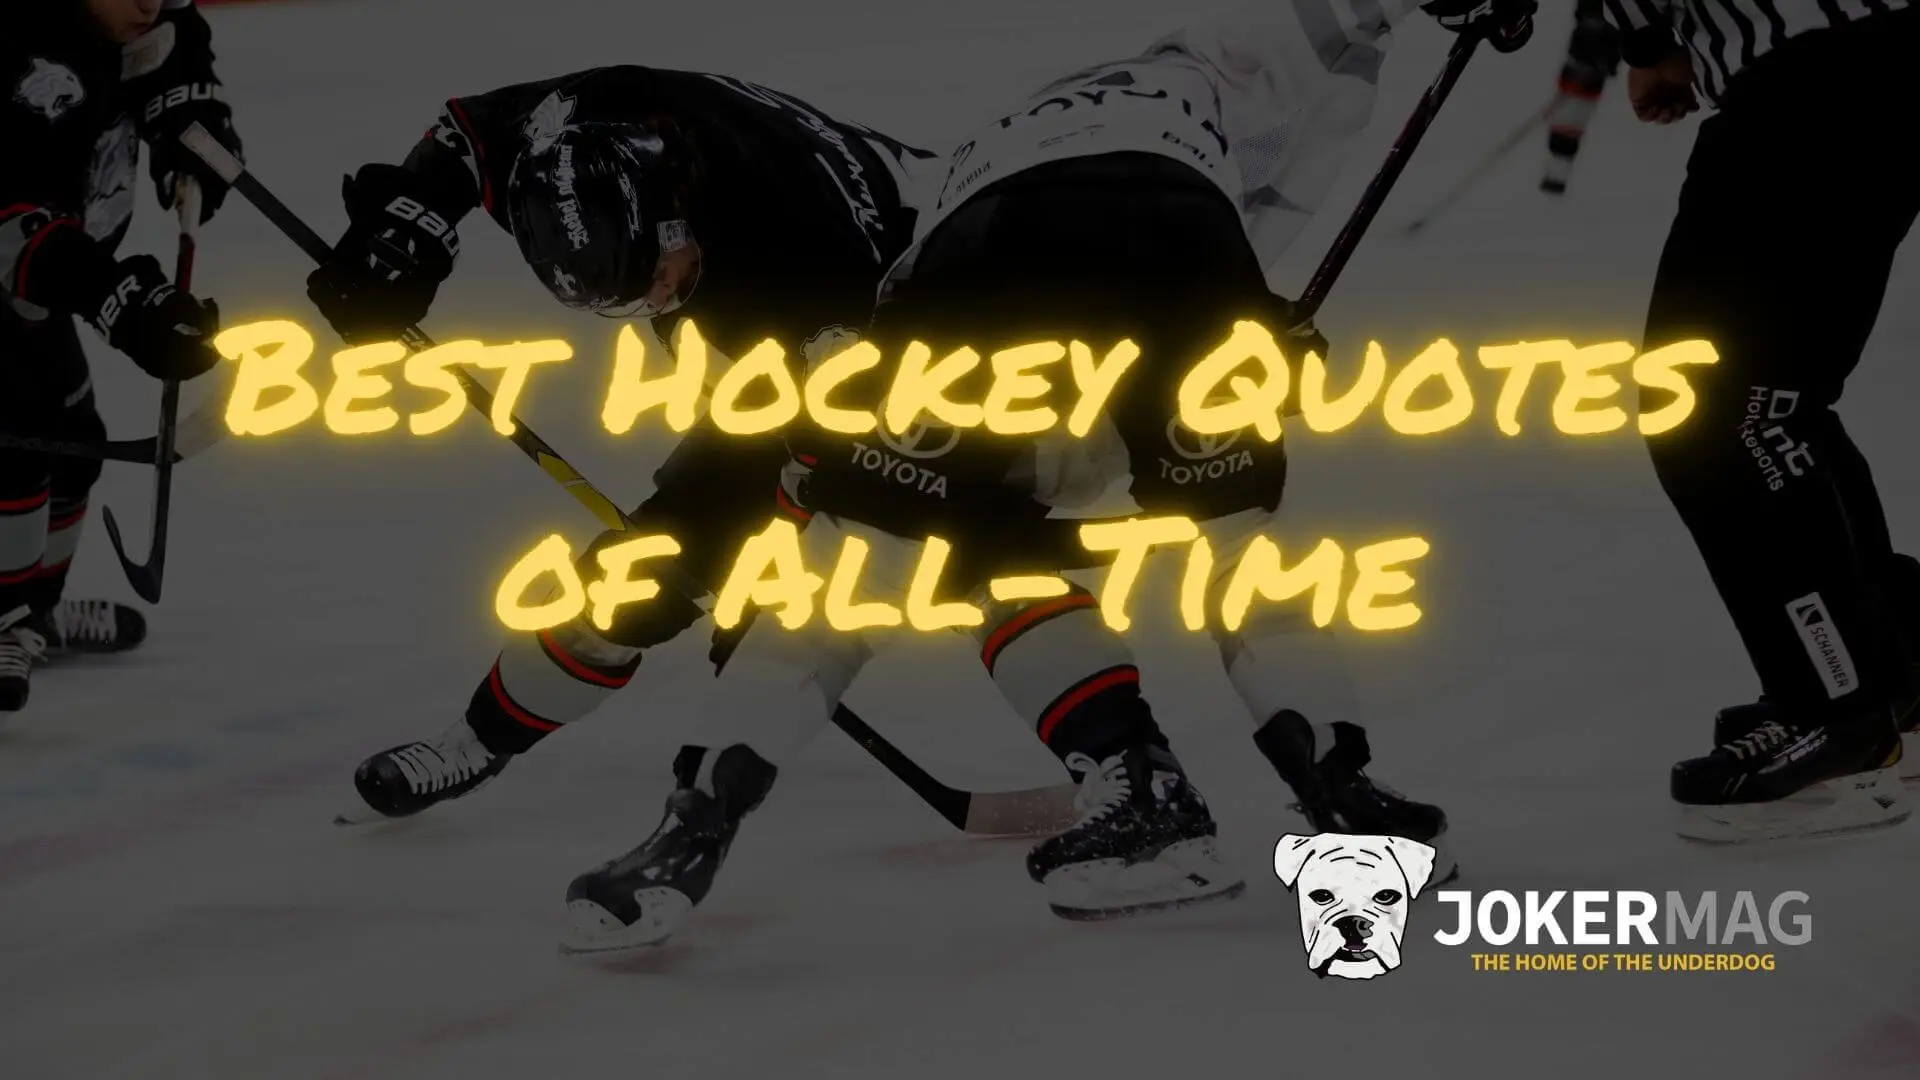 The best inspiring hockey quotes of all-time, by Joker Mag